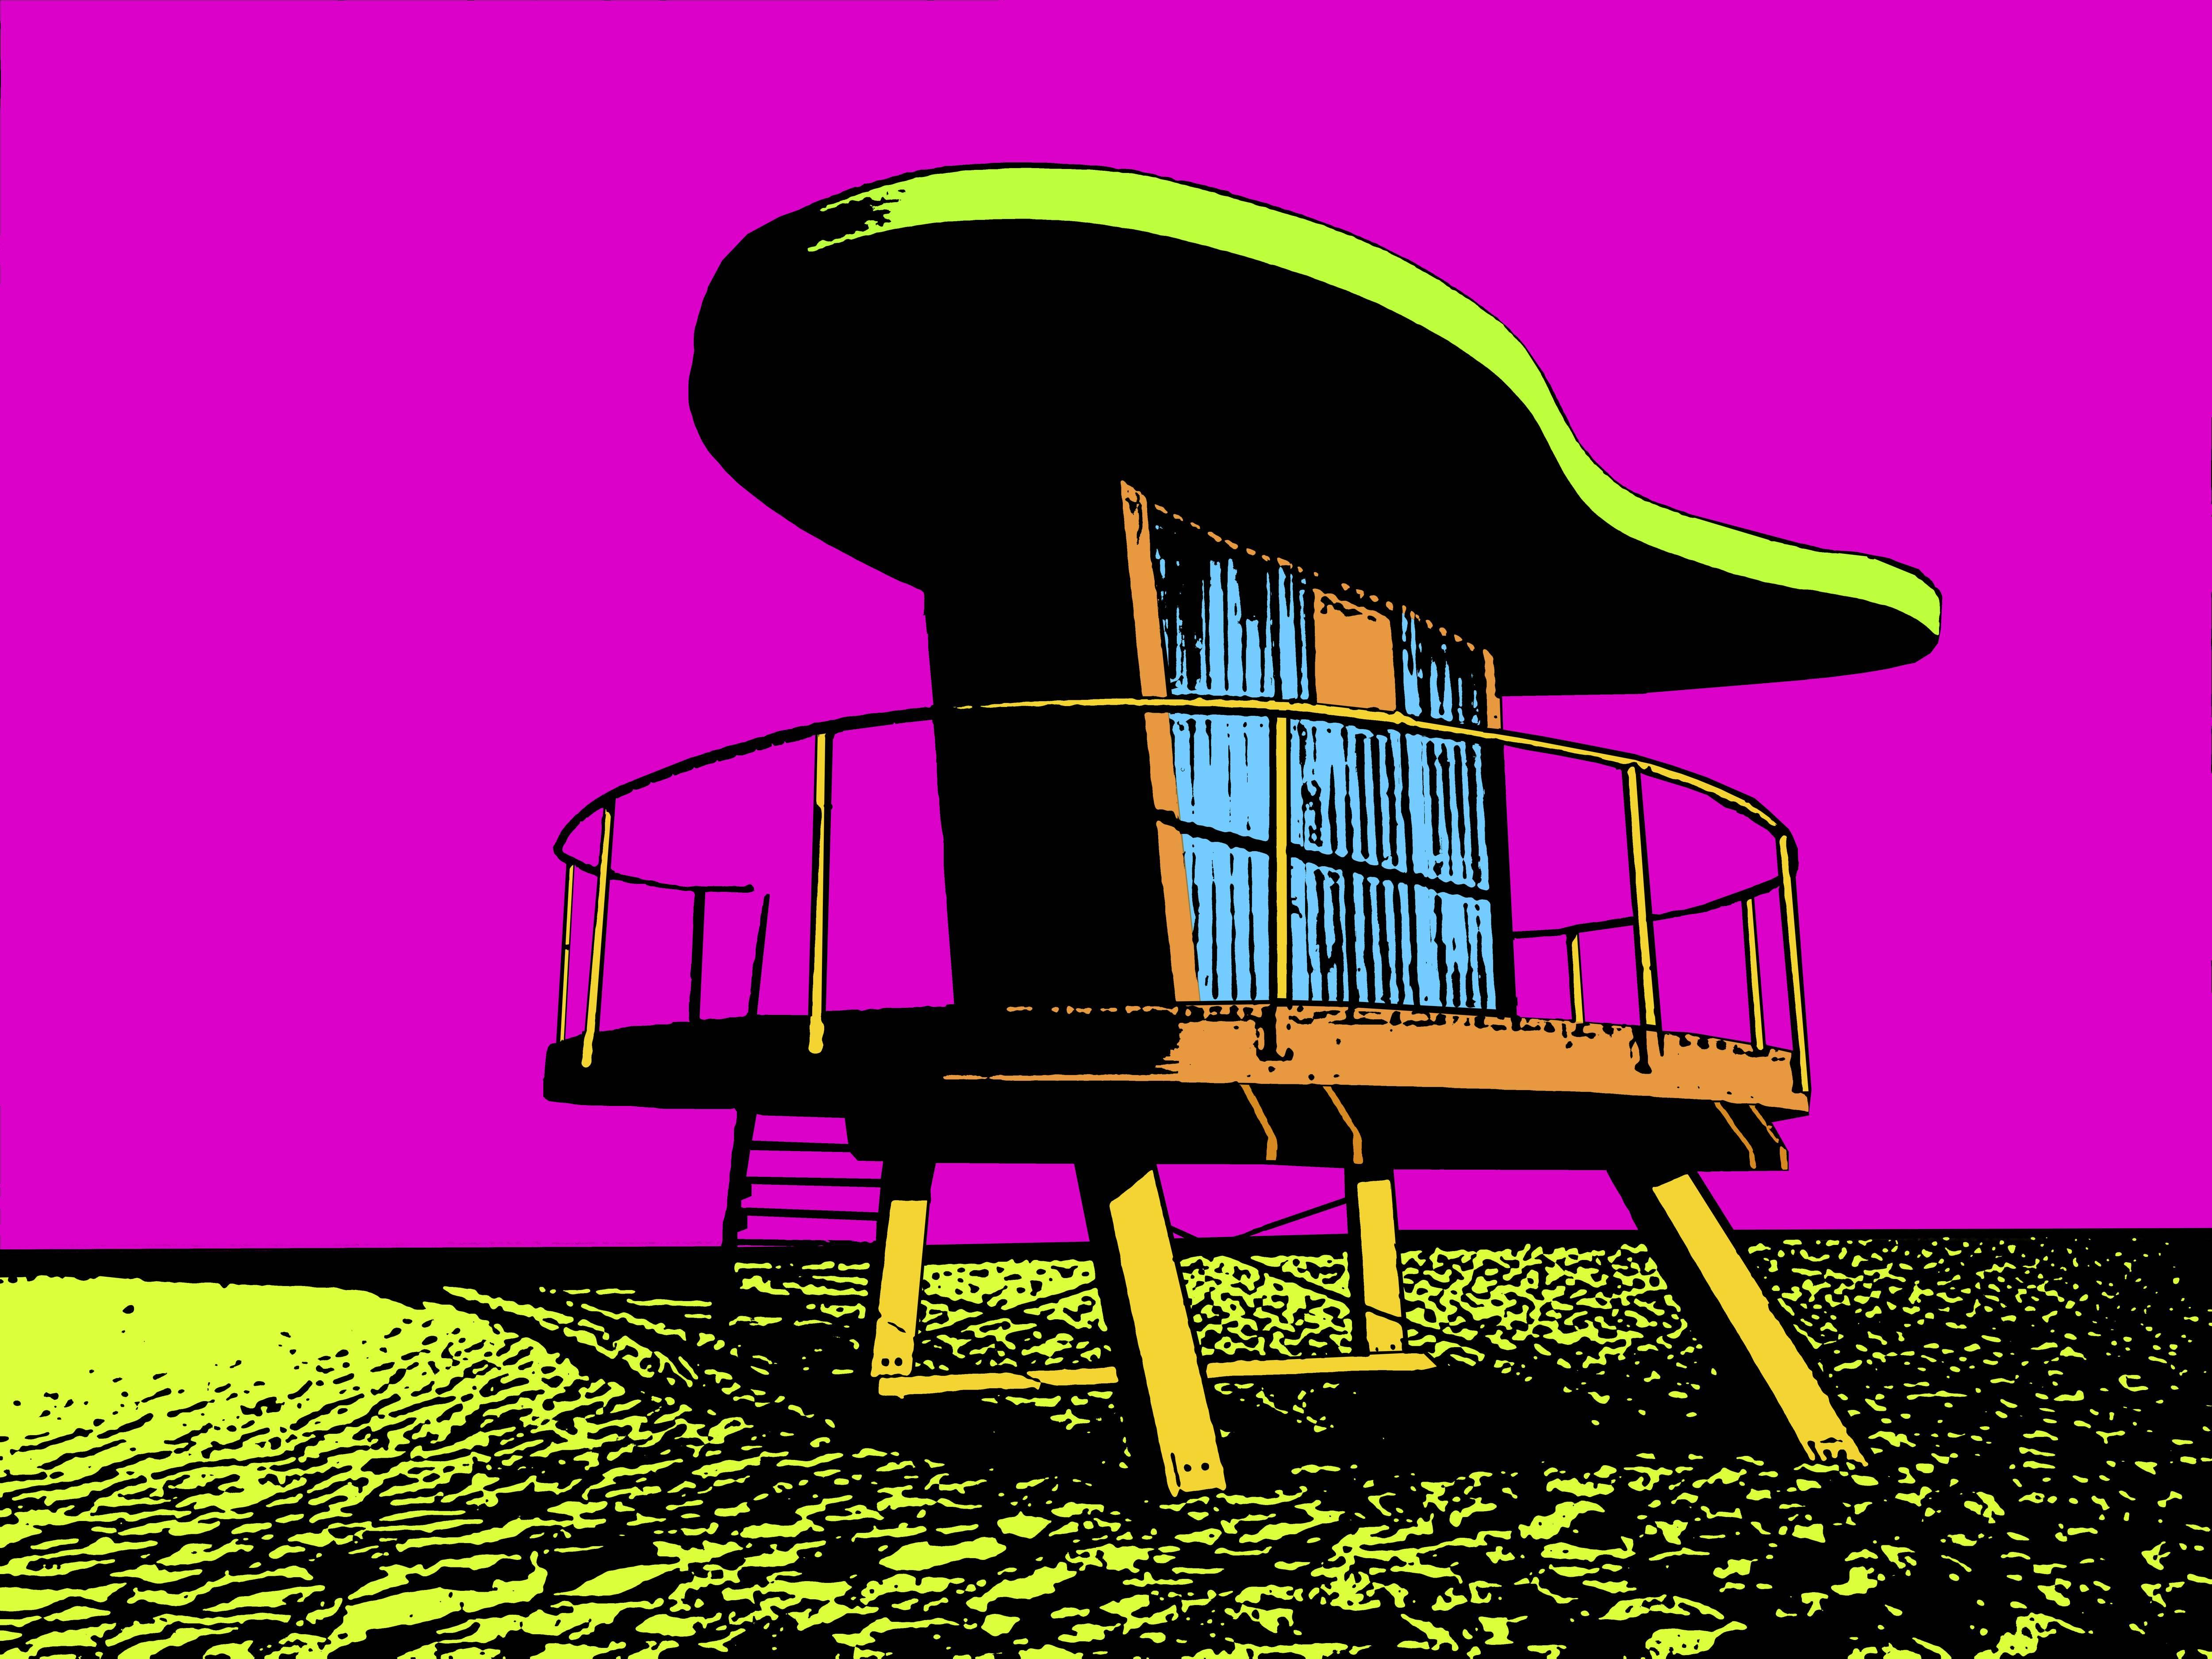 Richard Scudder Abstract Print - Miami Beach Lifeguard Stand #1. - In Pink, Screen Print